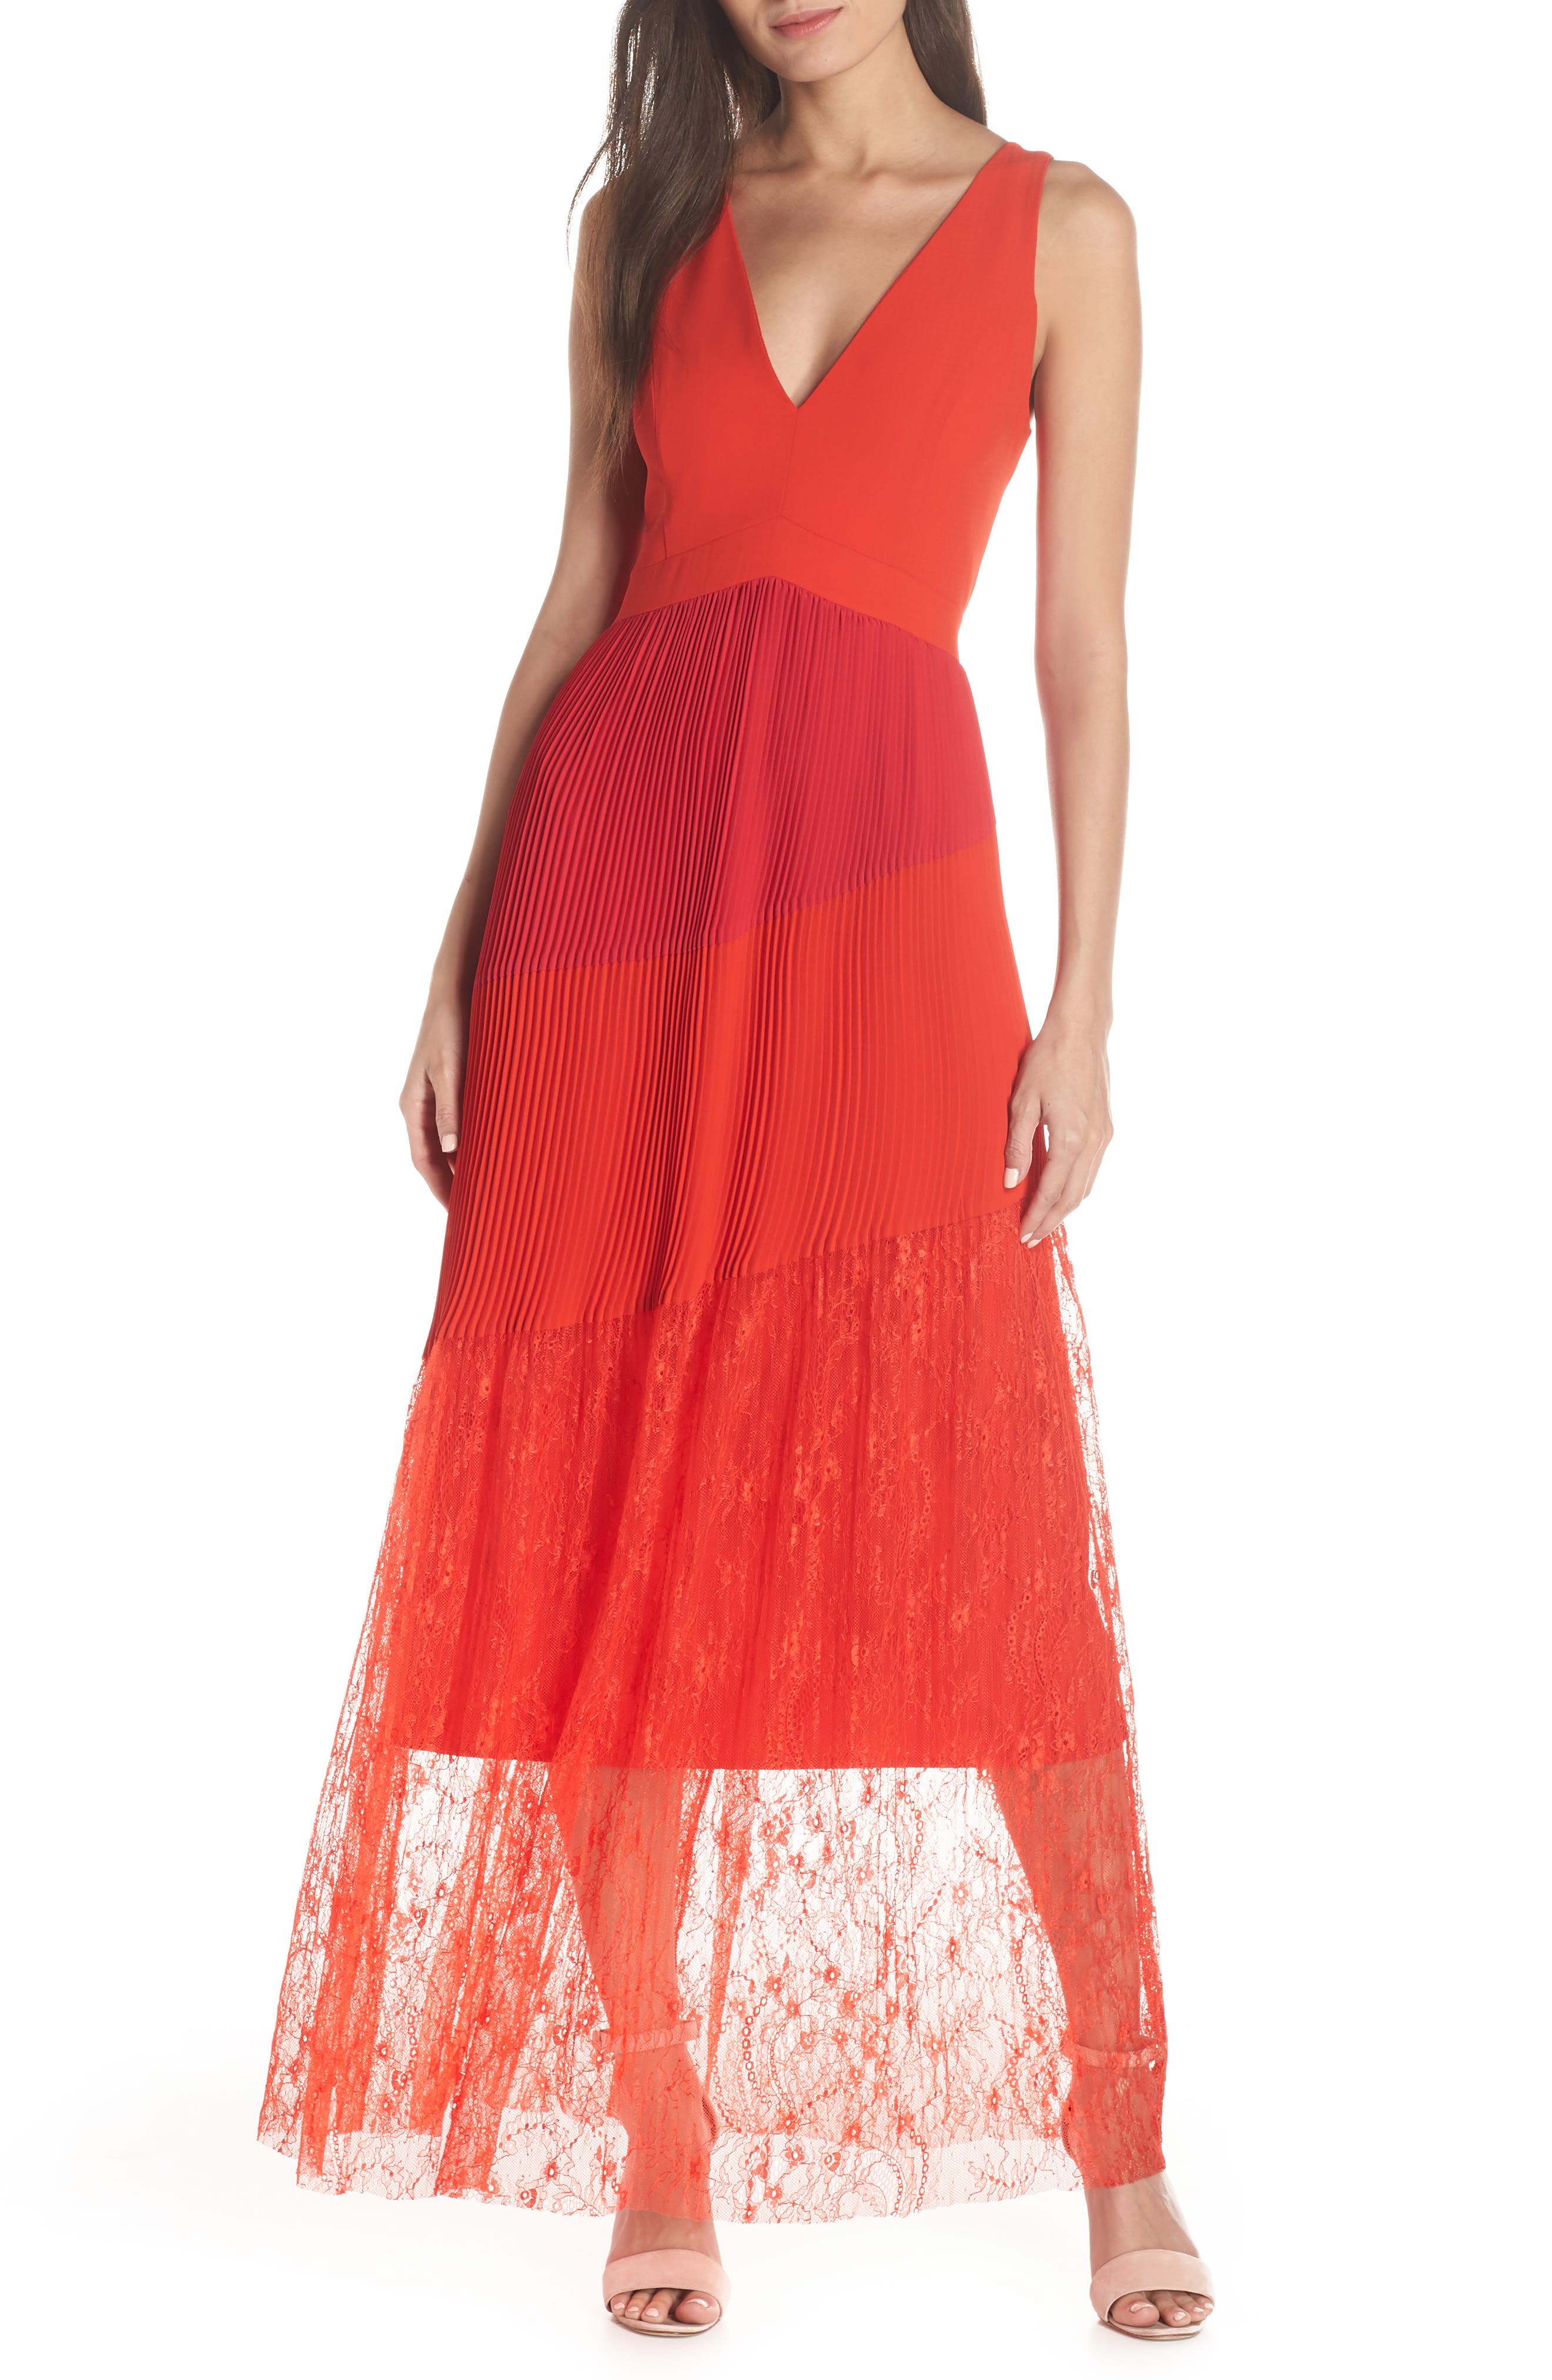 nordstrom red evening gowns